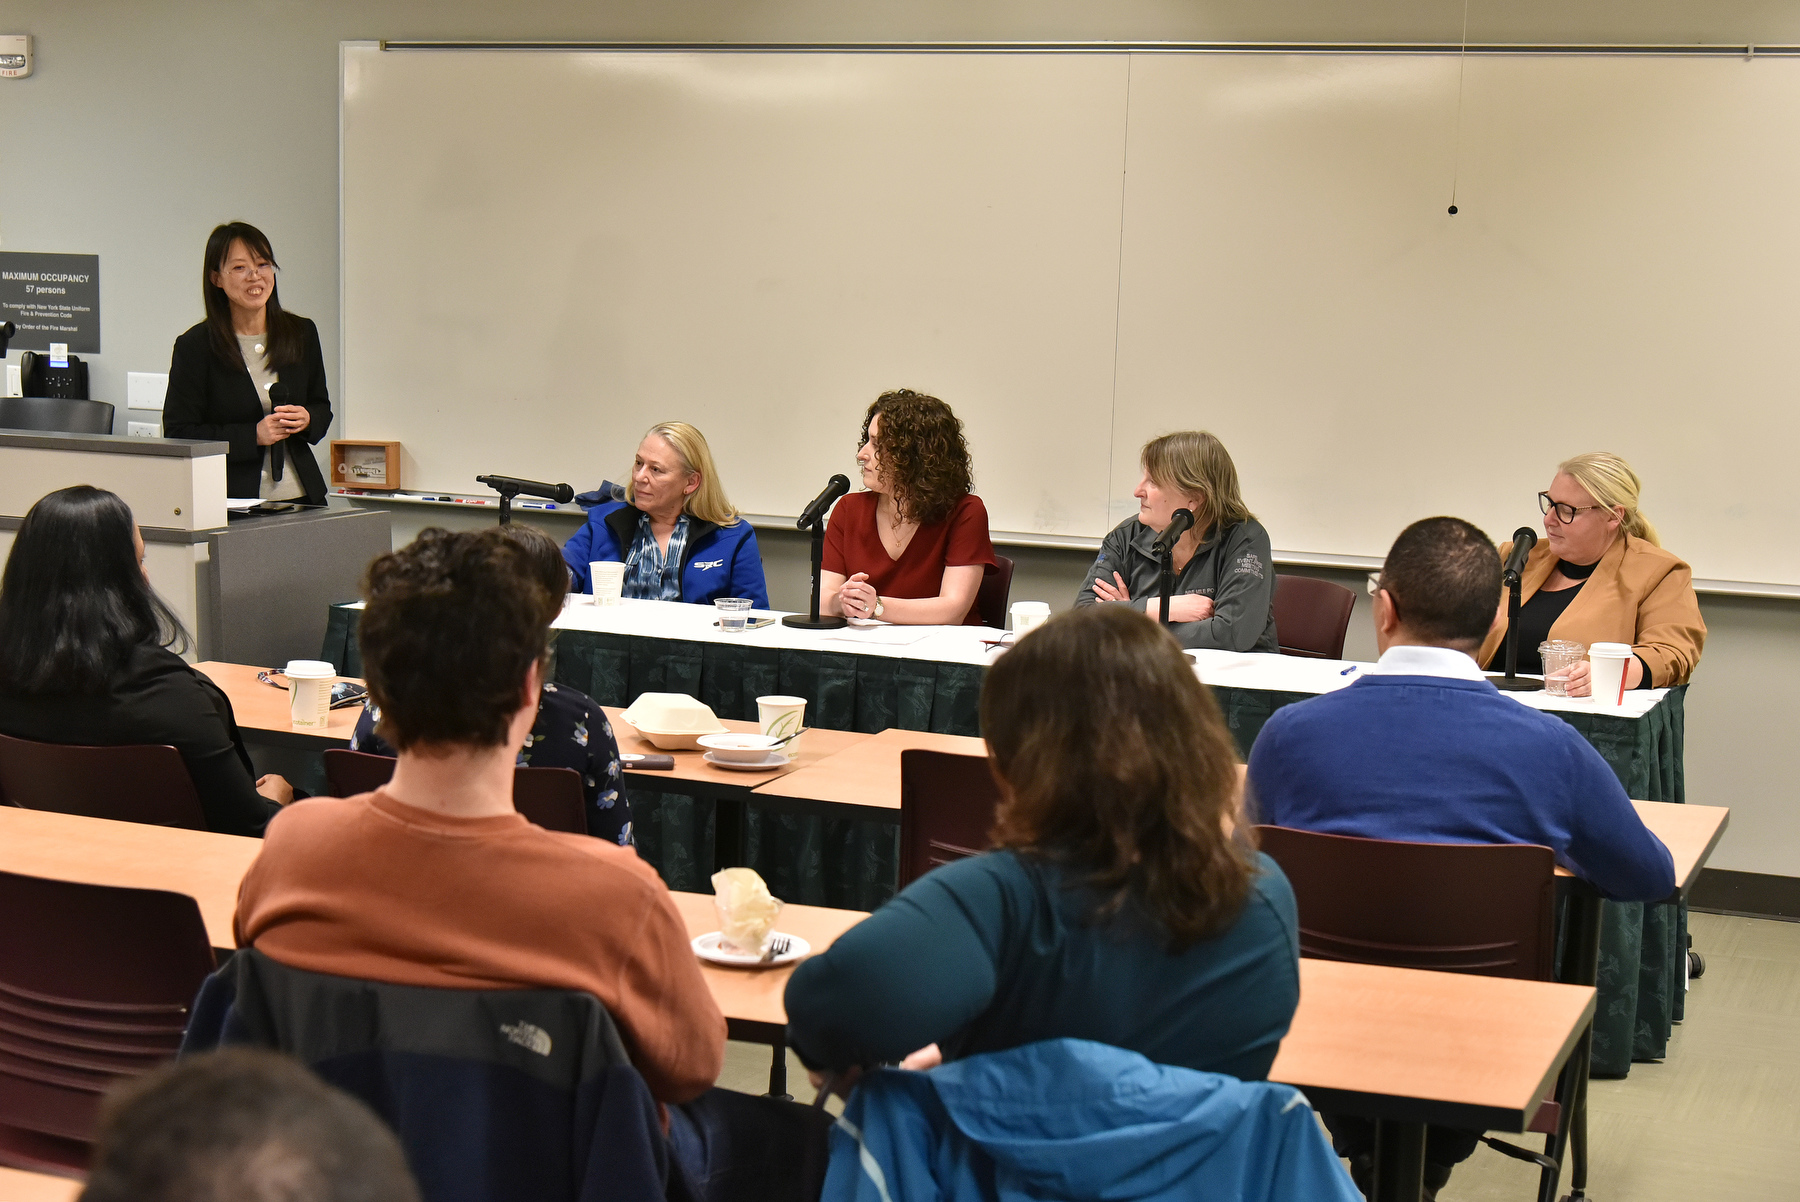 Engineering Week events featured a Focus on Women in Engineering panel discussion with prominent local female engineers working in industry.